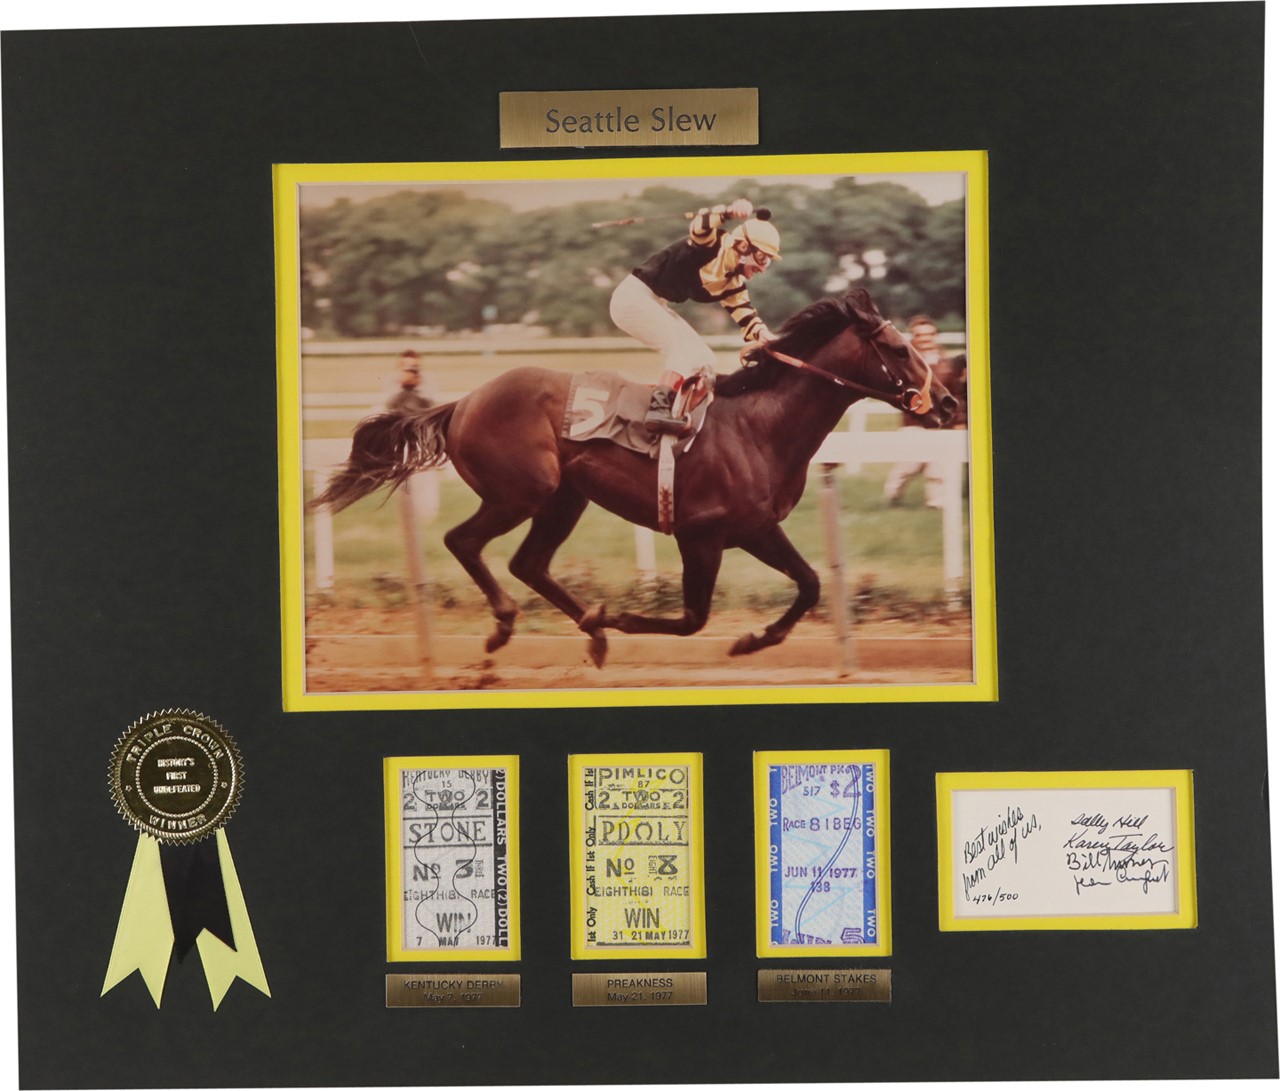 - Seattle Slew Triple Crown Win Ticket Display with Four Signatures